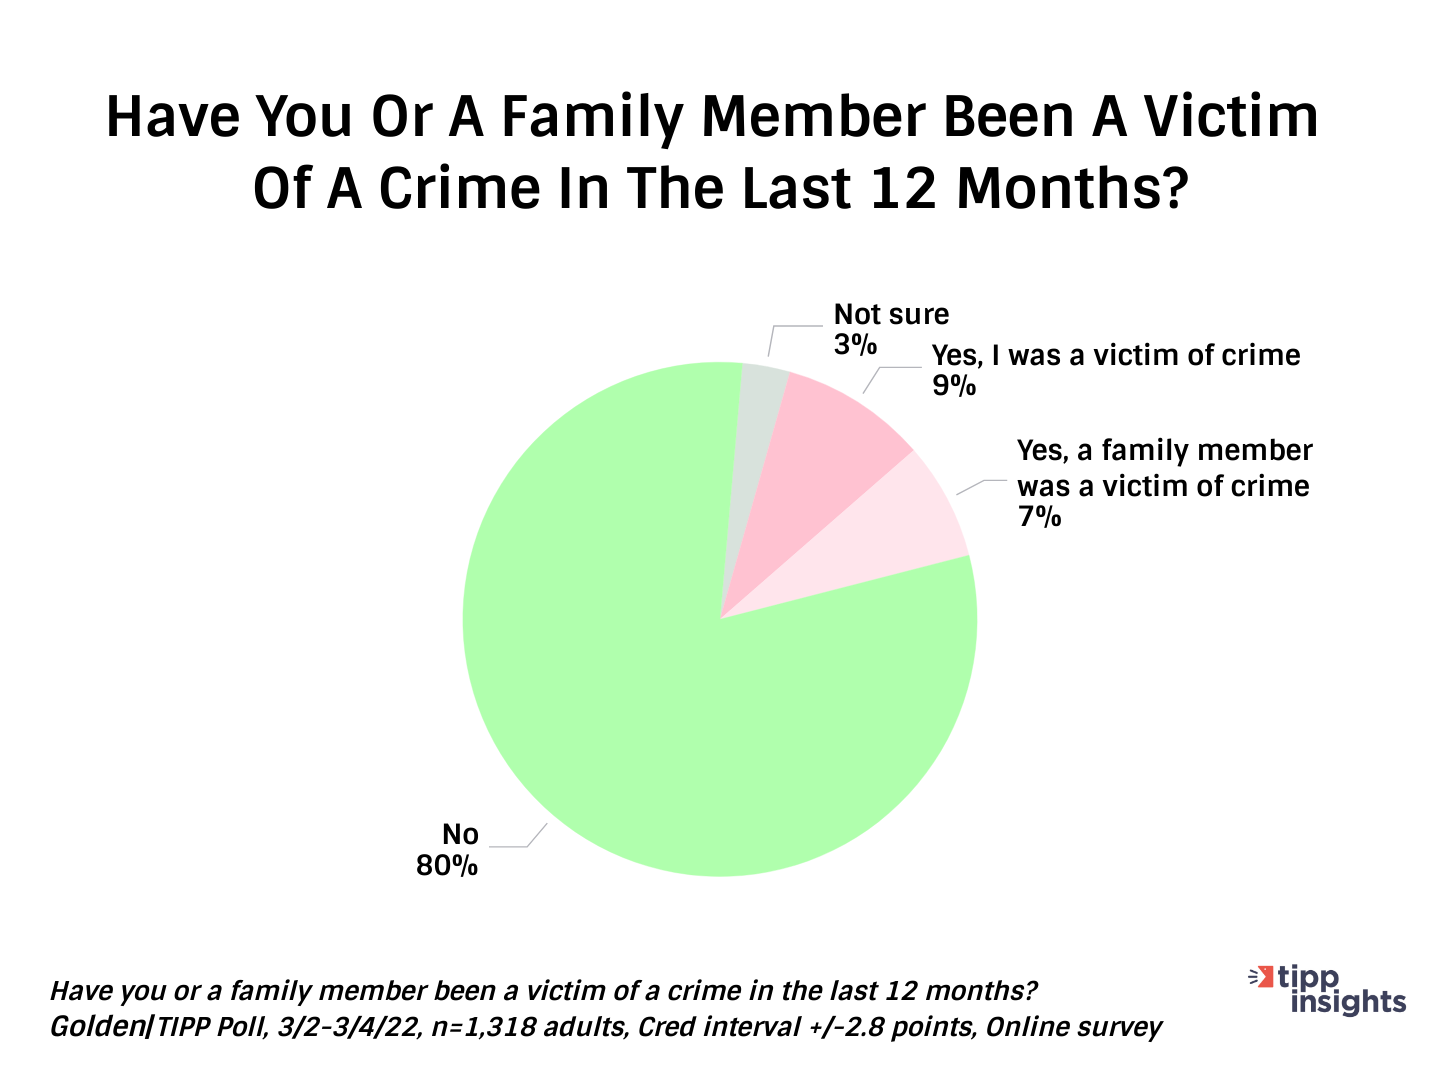 Golden/TIPP Poll results: How many Americans have themselves or a family member been a victim of crime in the last 12 months?